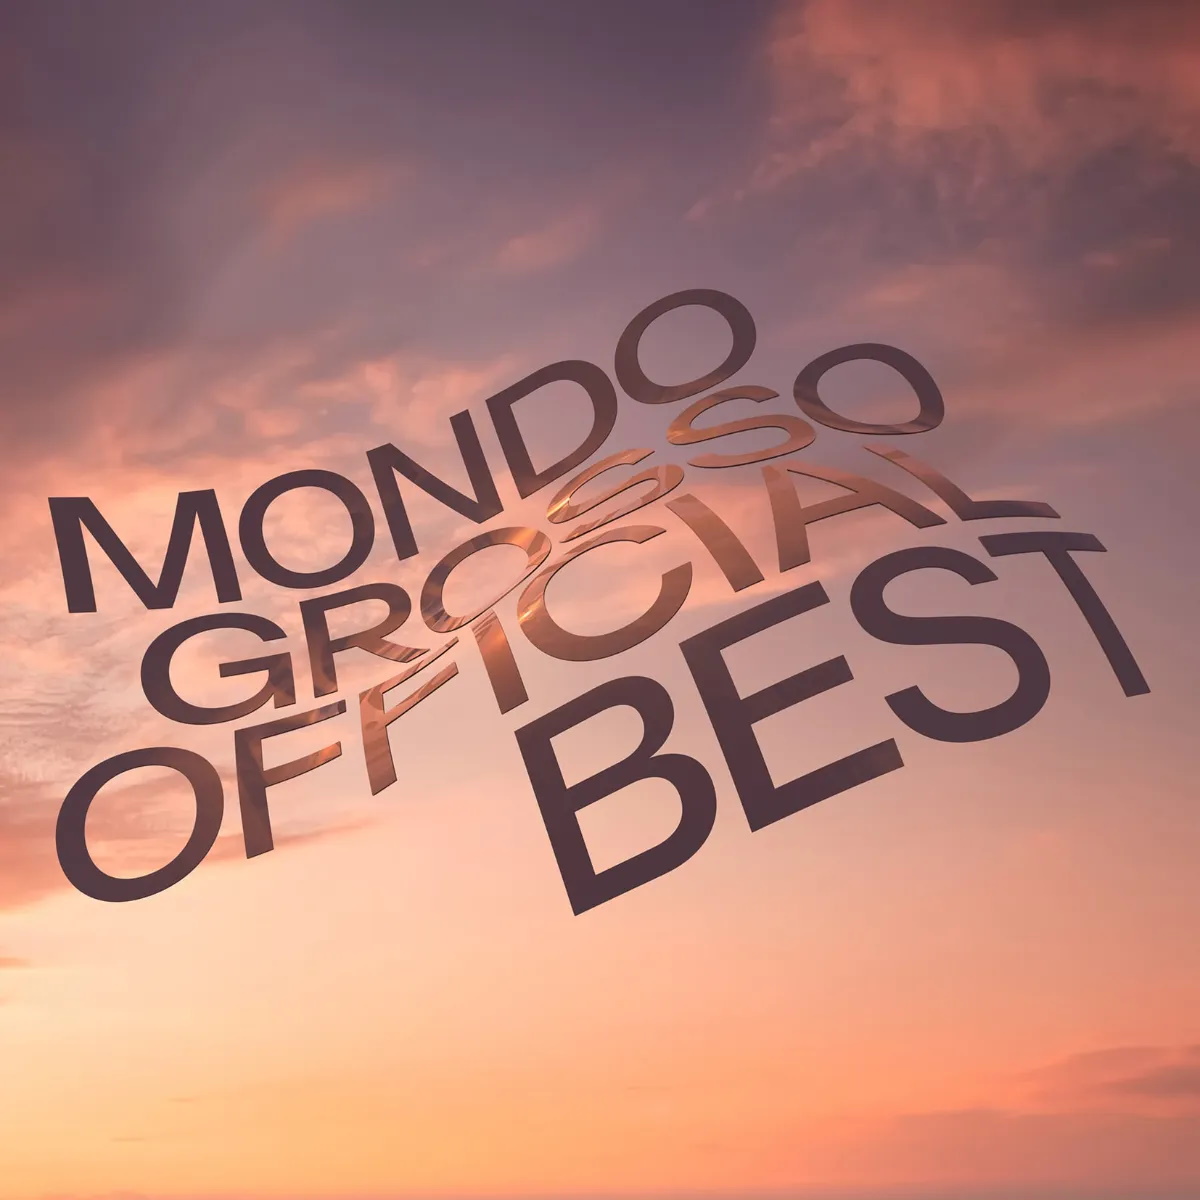 Cover art for『MONDO GROSSO - NOW YOU KNOW BETTER (MGOB RMSTRD)』from the release『MONDO GROSSO OFFICIAL BEST』